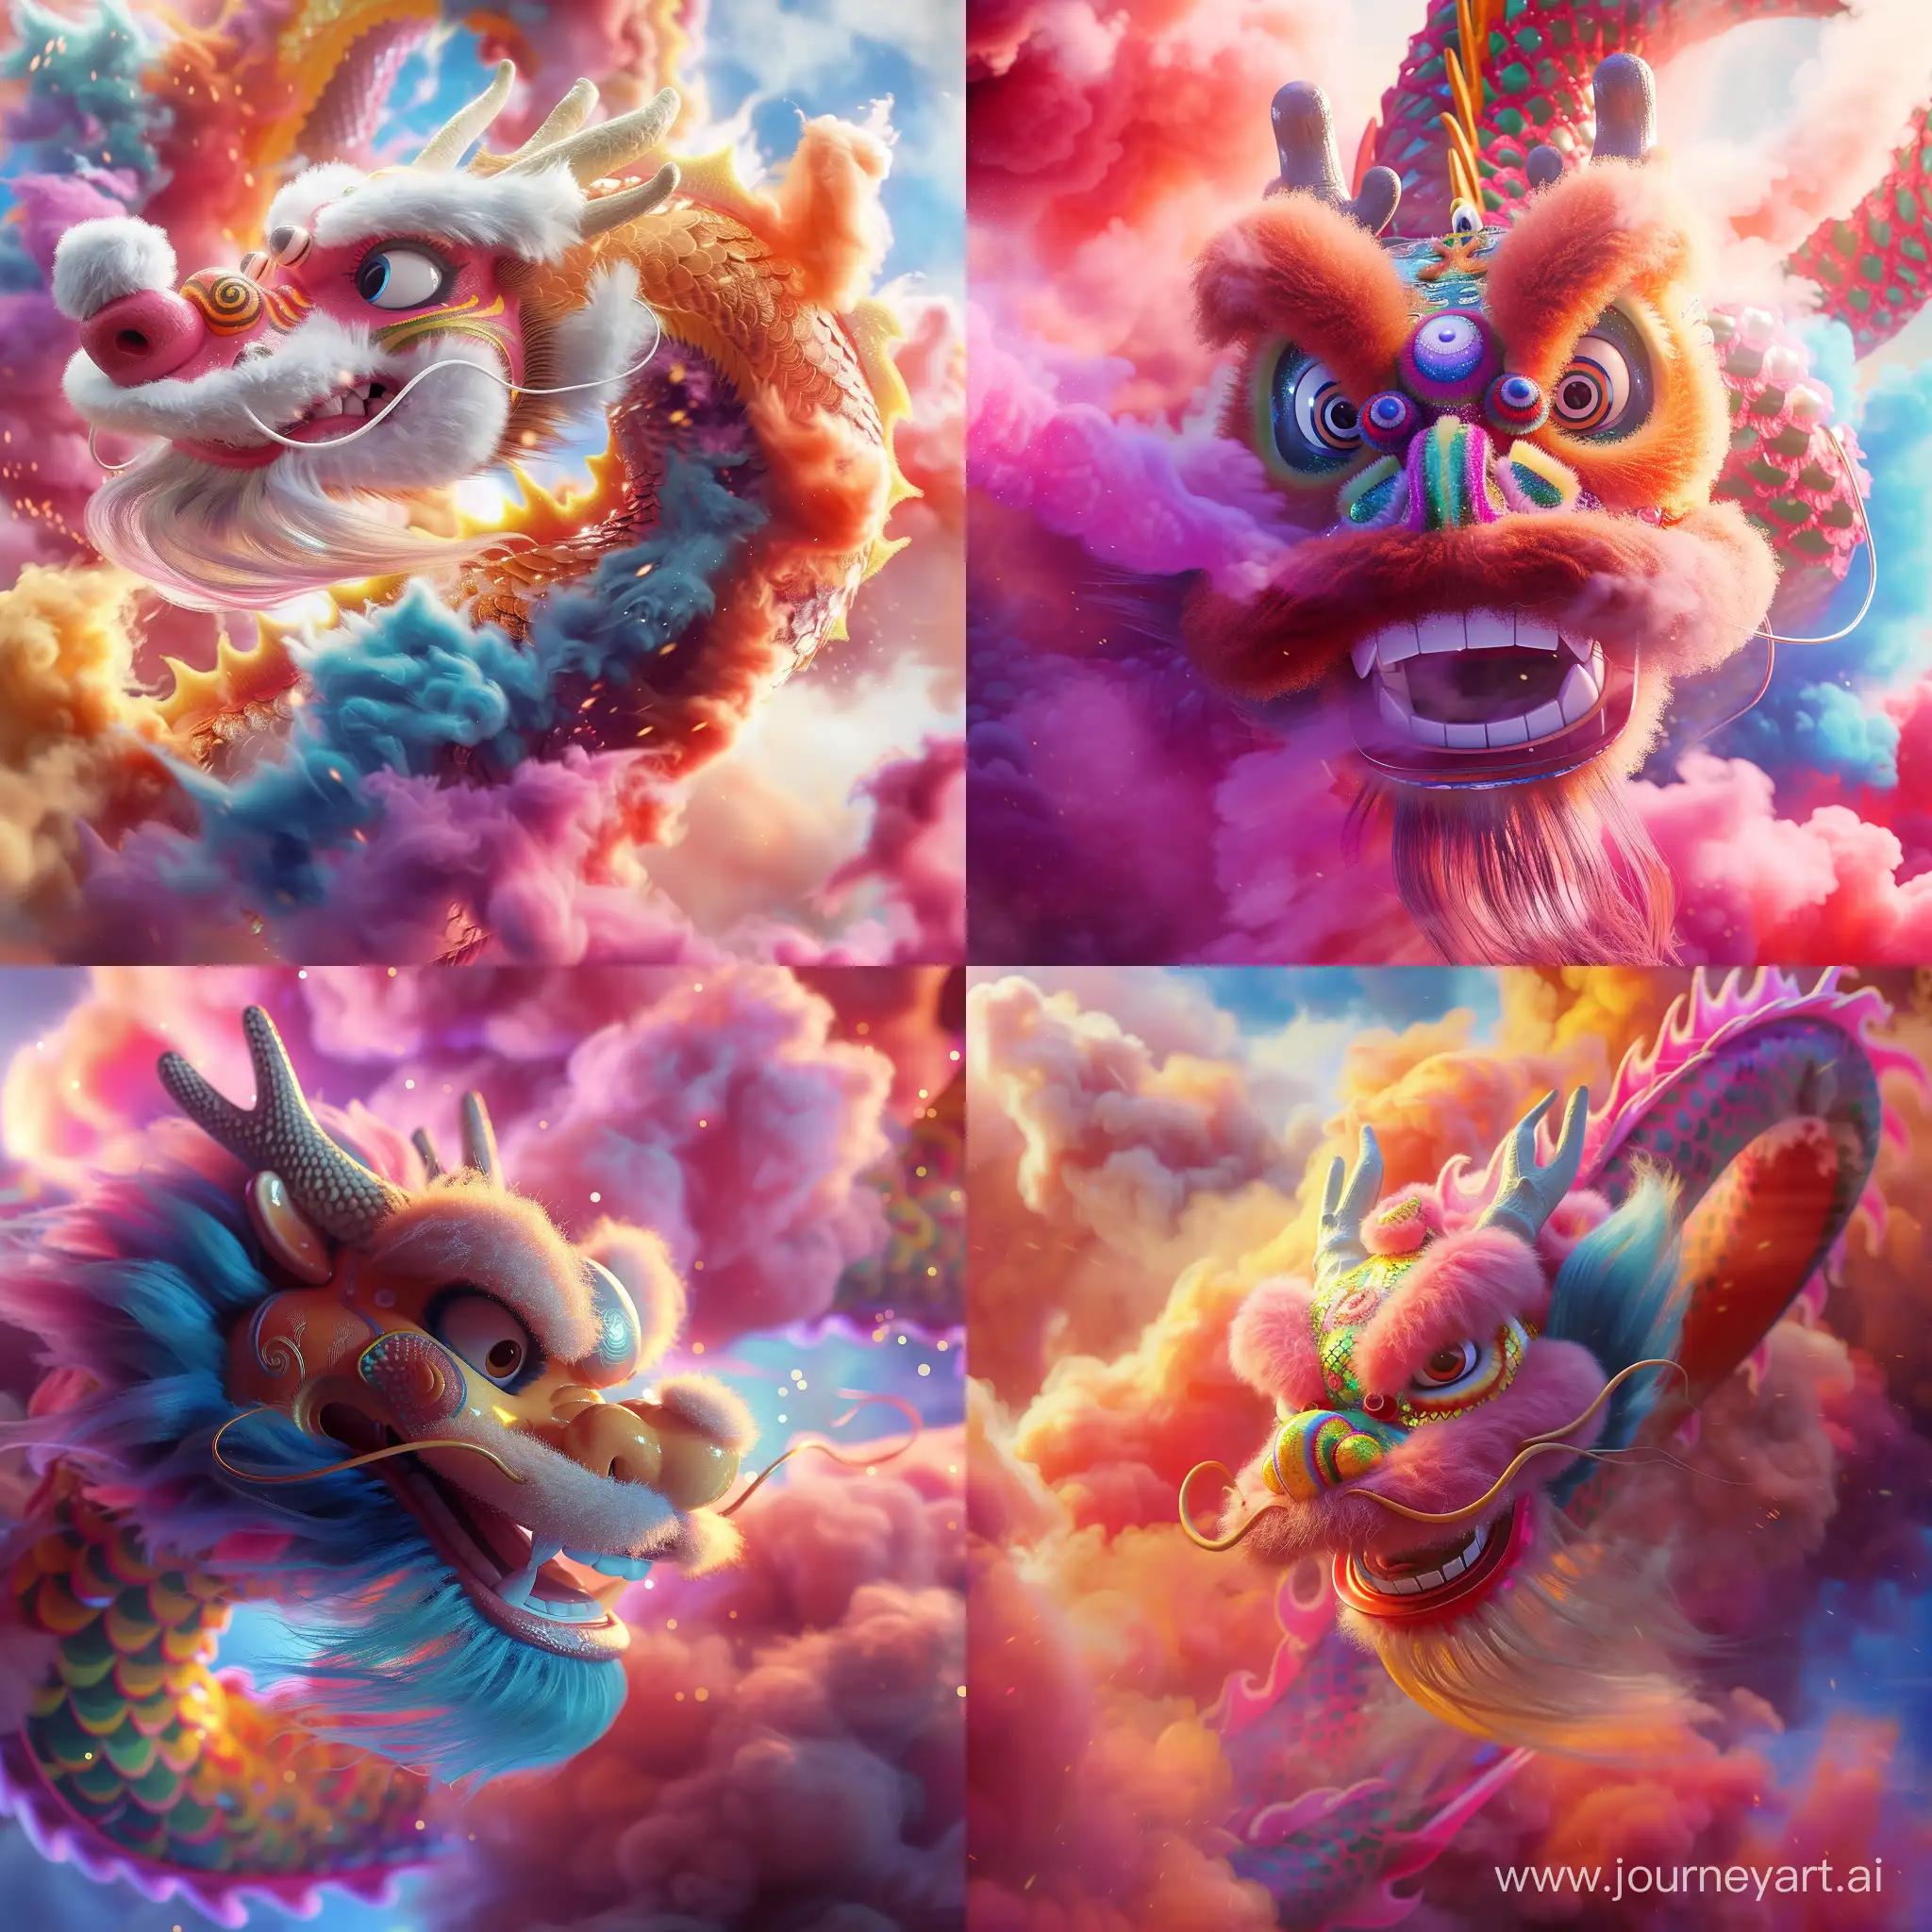 Vibrant-Chinese-Dragon-Soaring-in-Festive-Atmosphere-Closeup-in-Pixar-Animation-Style